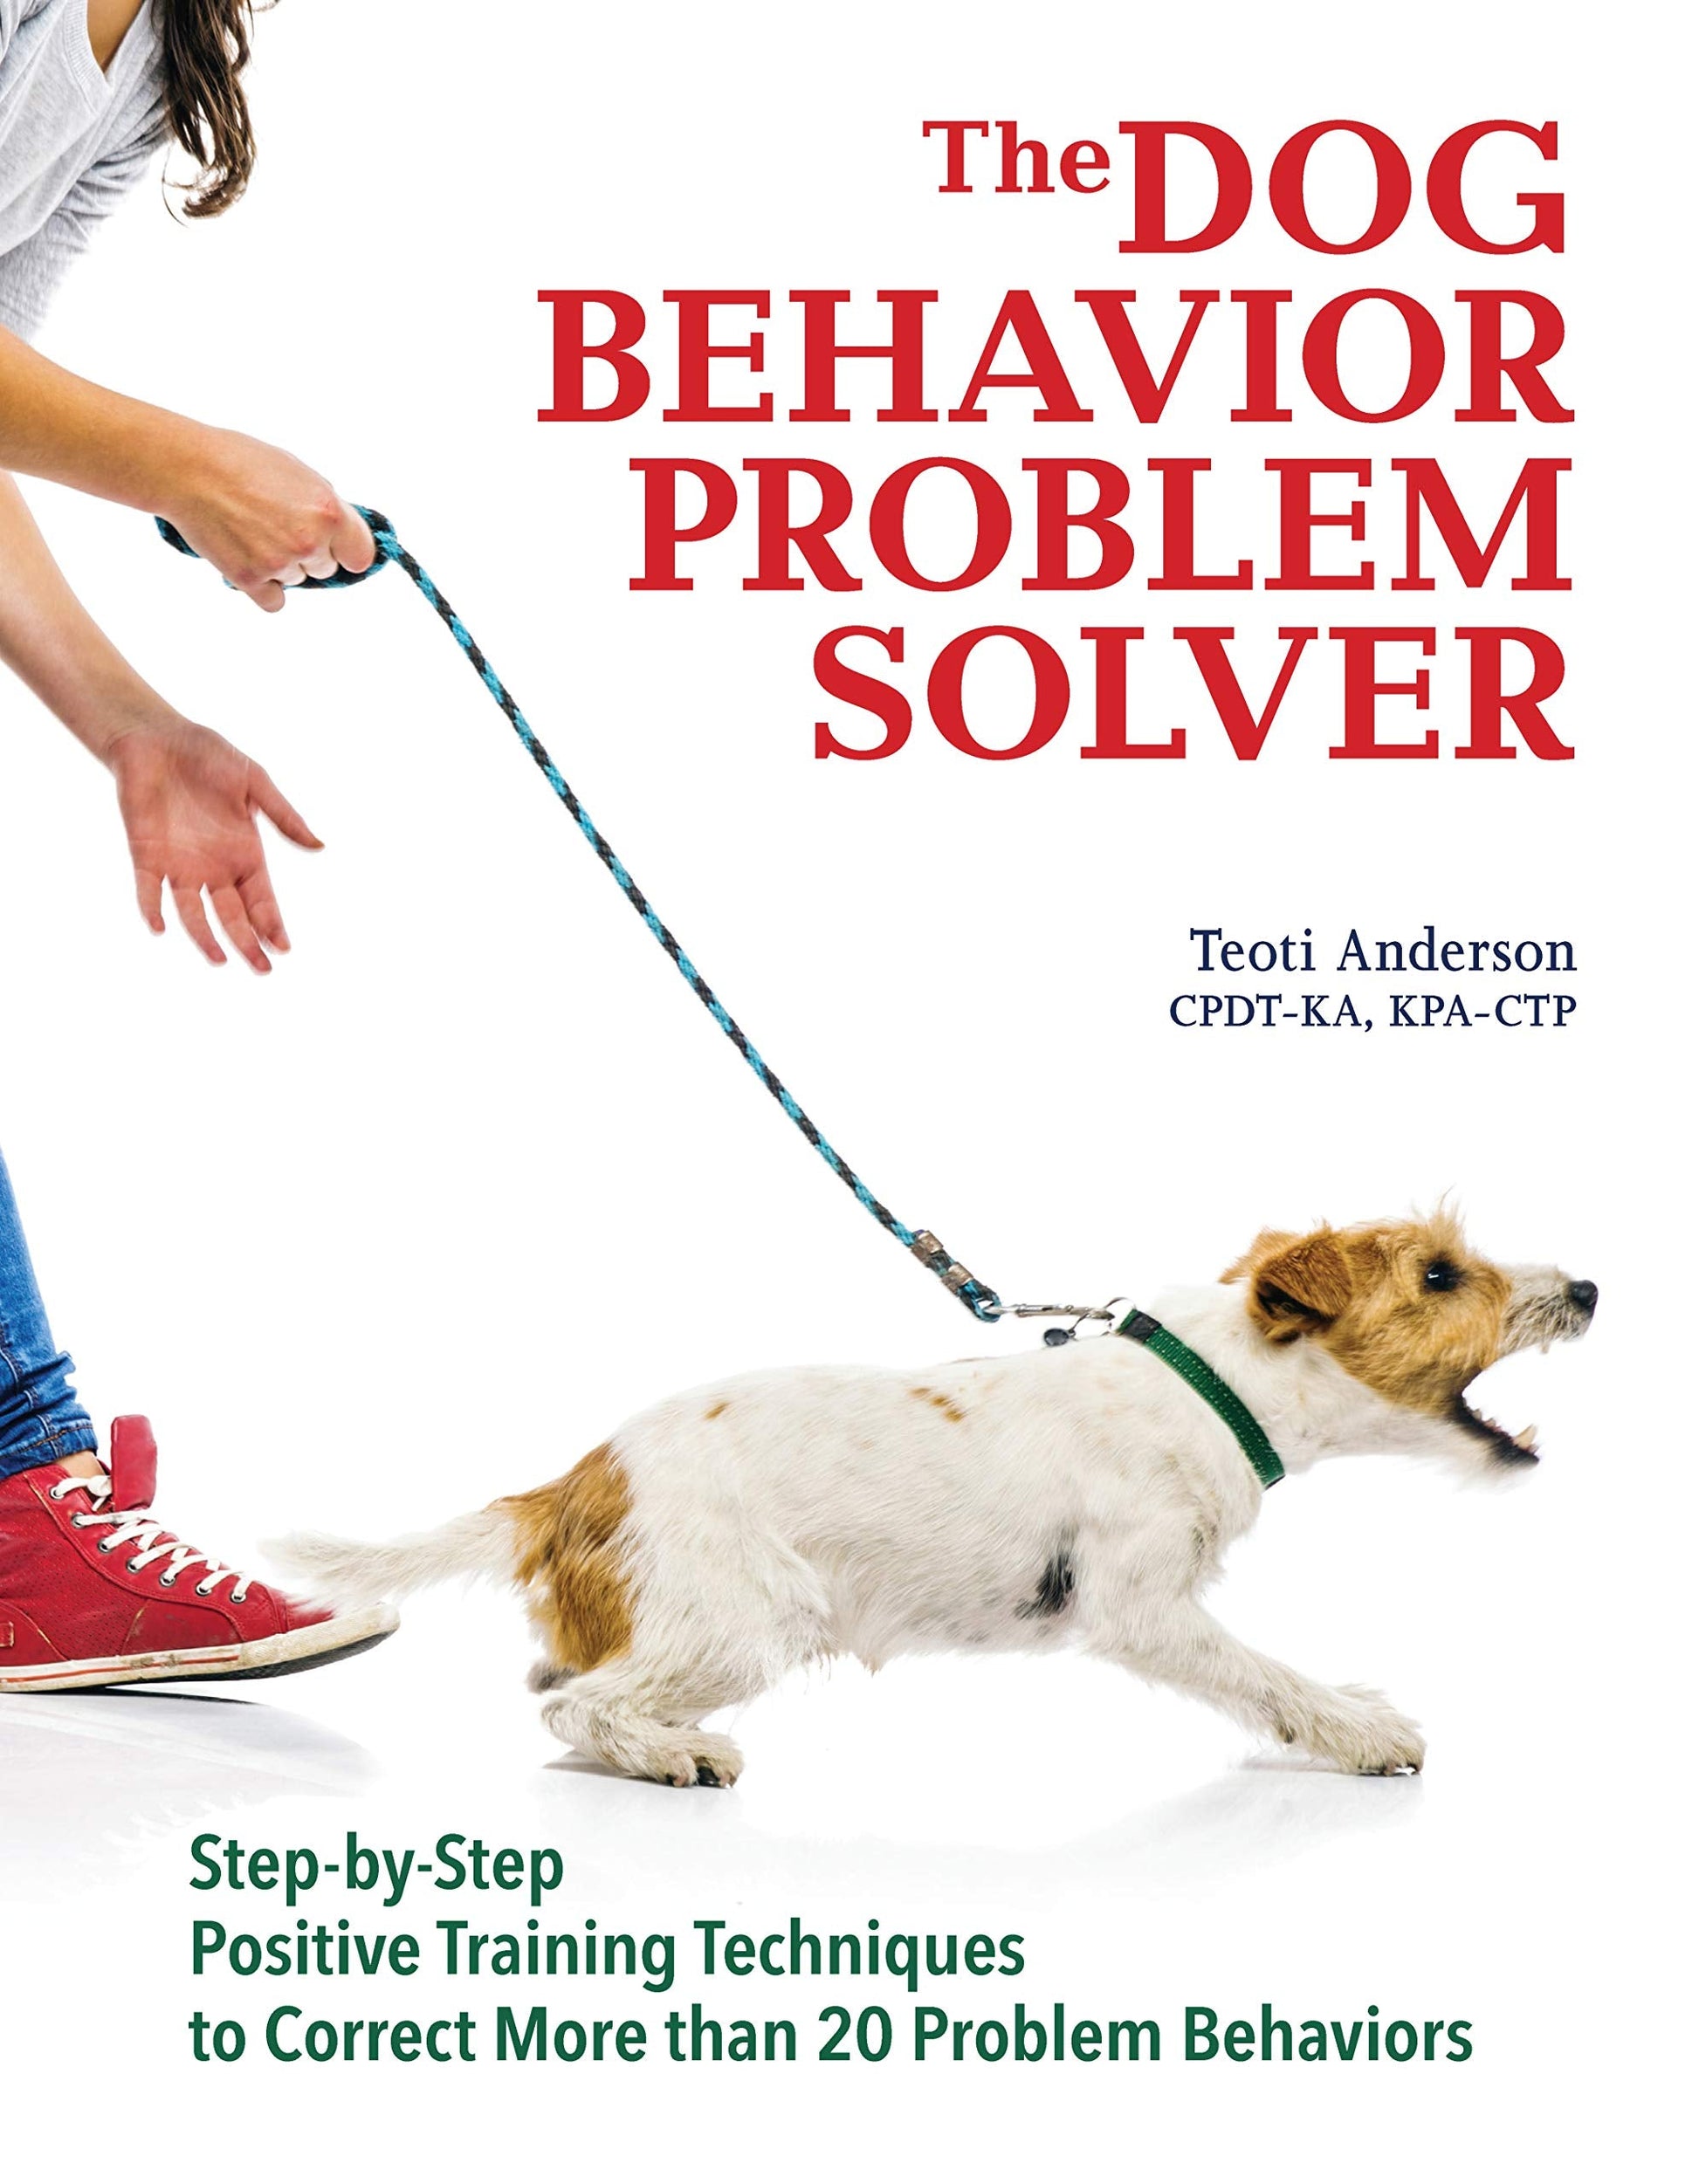 Dogster Dog Behavior Problem Solver Book by Teoti Anderson